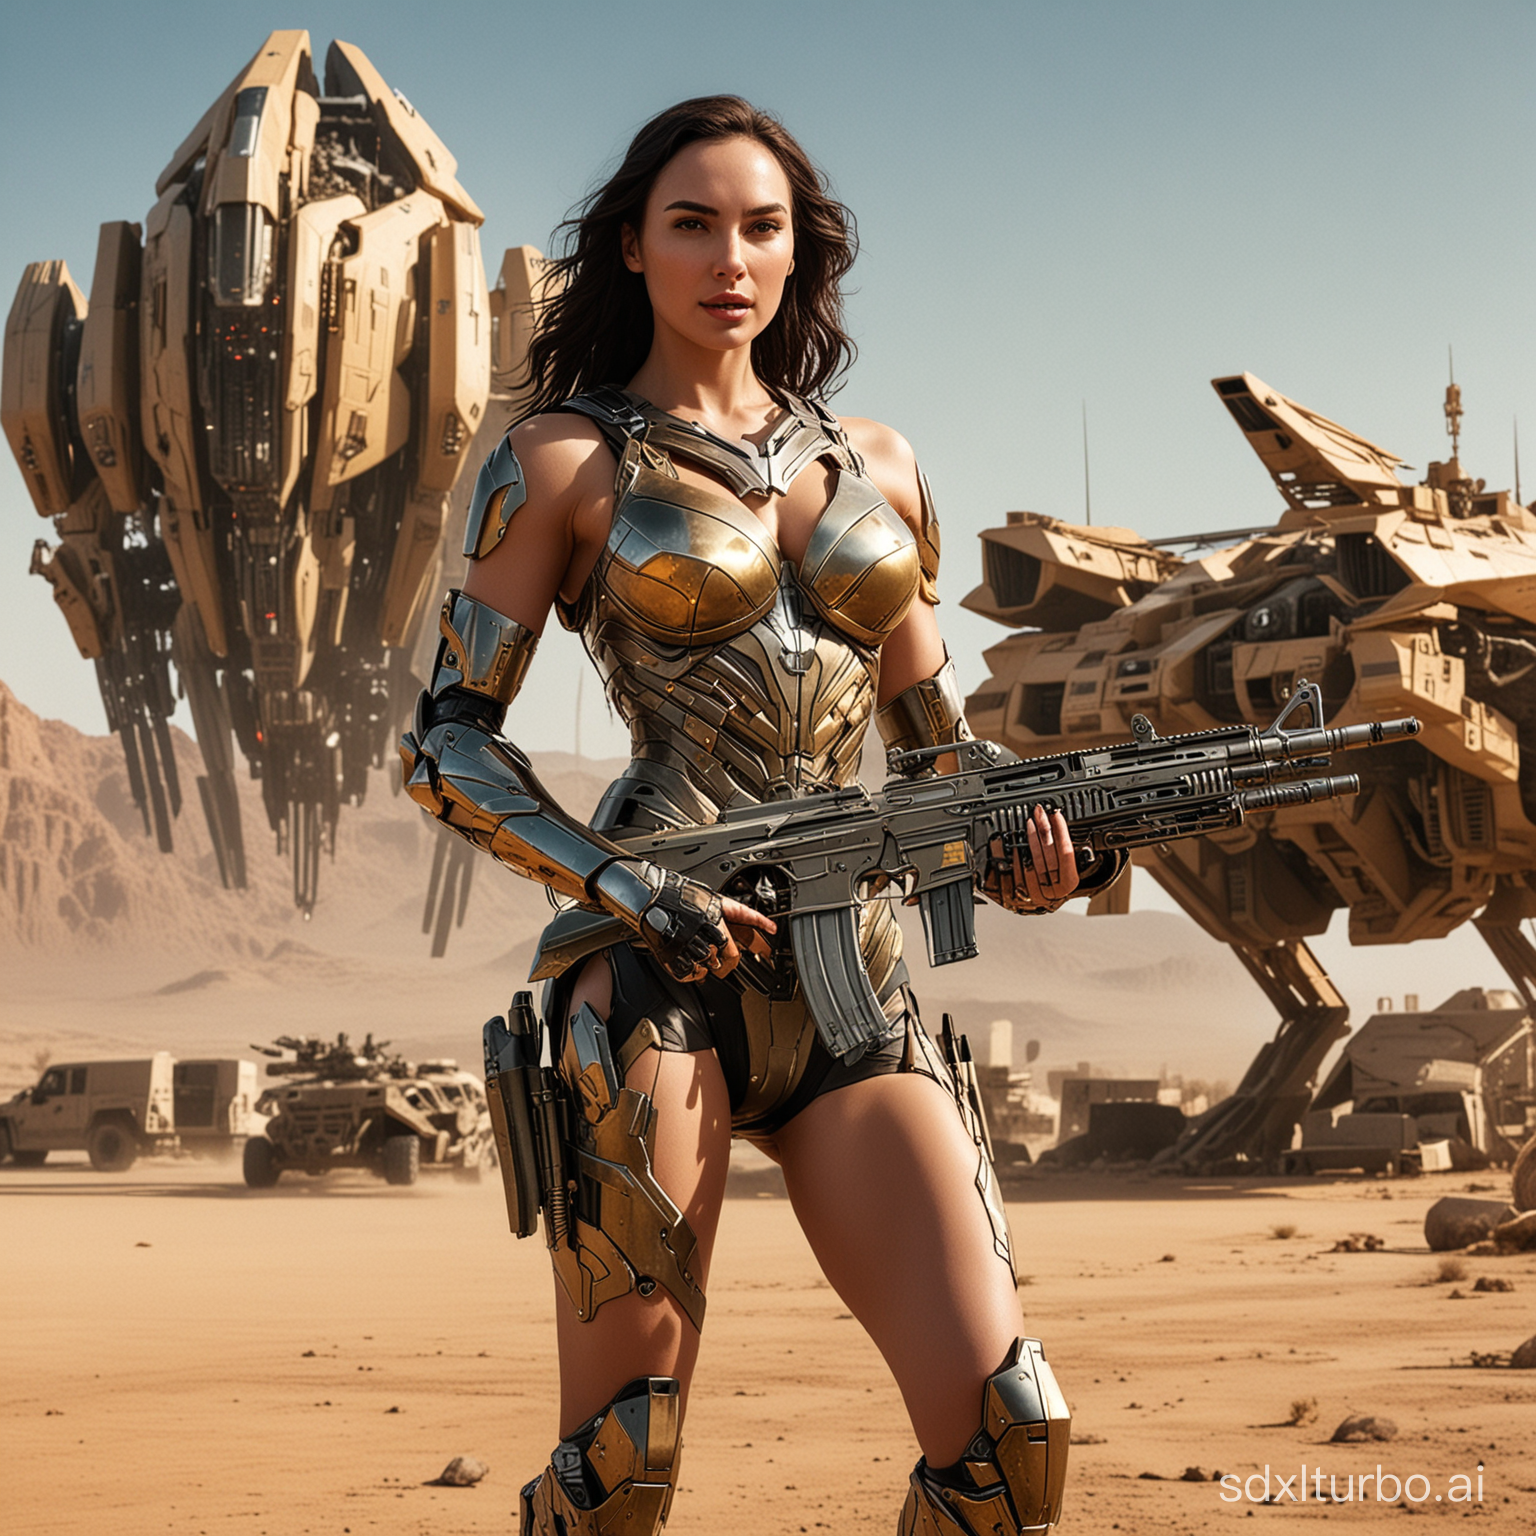 robot transformer AI that looks exactly like a sexy hot naked hot woman that looks like Gal Gadot with a sexy smile, tunning with guns blazing, outside in the desert with a futuristic military compound building on the background, and a large spaceship in the air. She's holding a cyber shiper rifle, full body visible. The metal pieces have a golden colour to it.